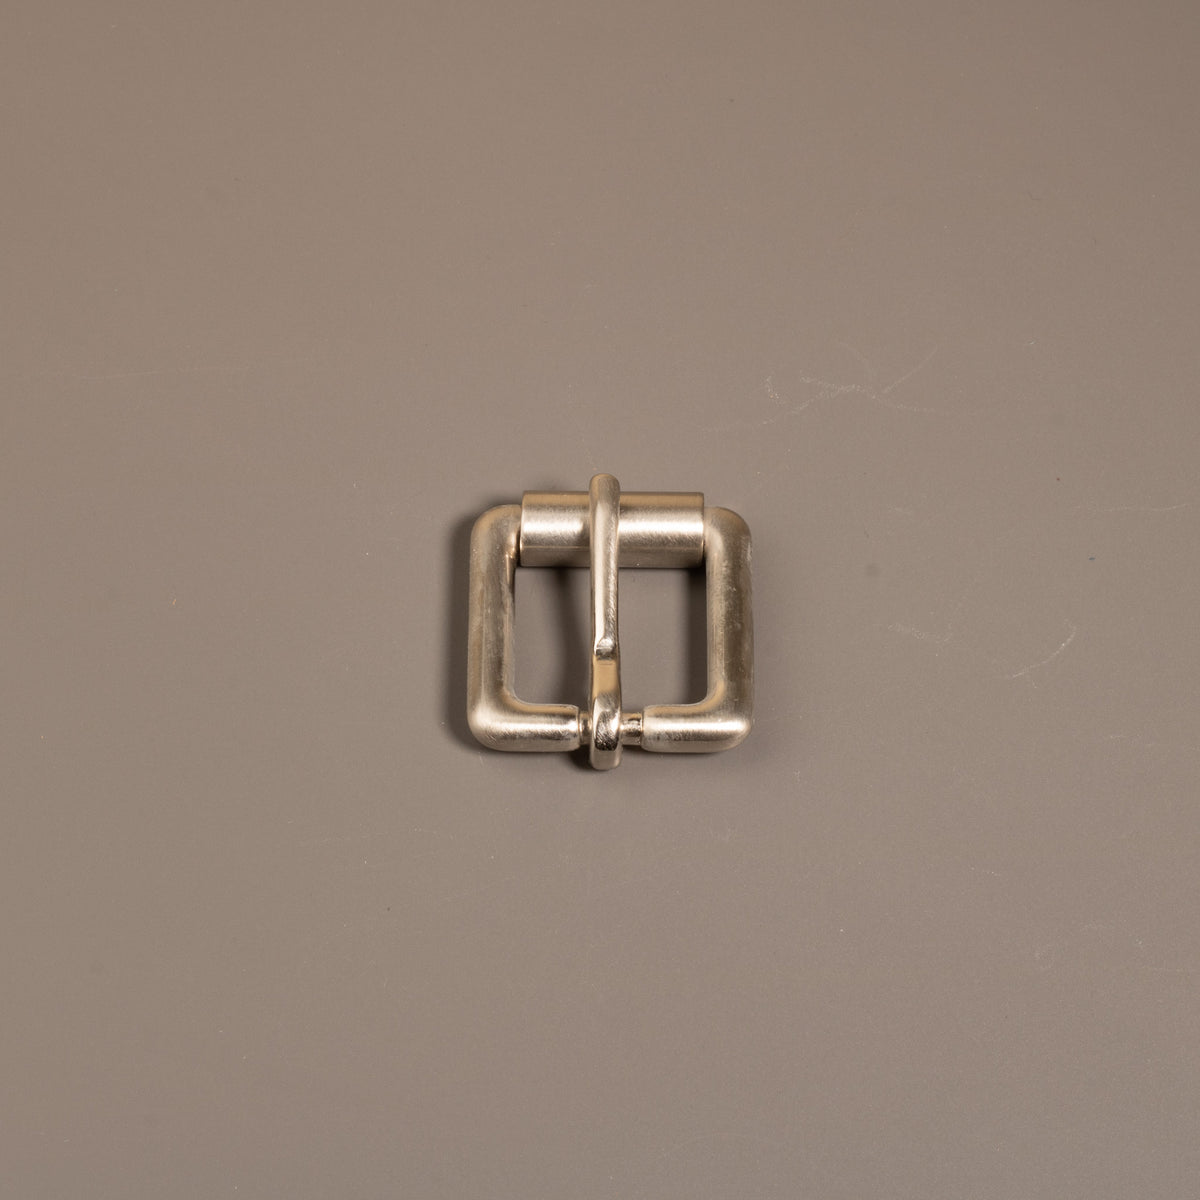 POLISHED SOLID BRASS BUCKLE - 2 CM